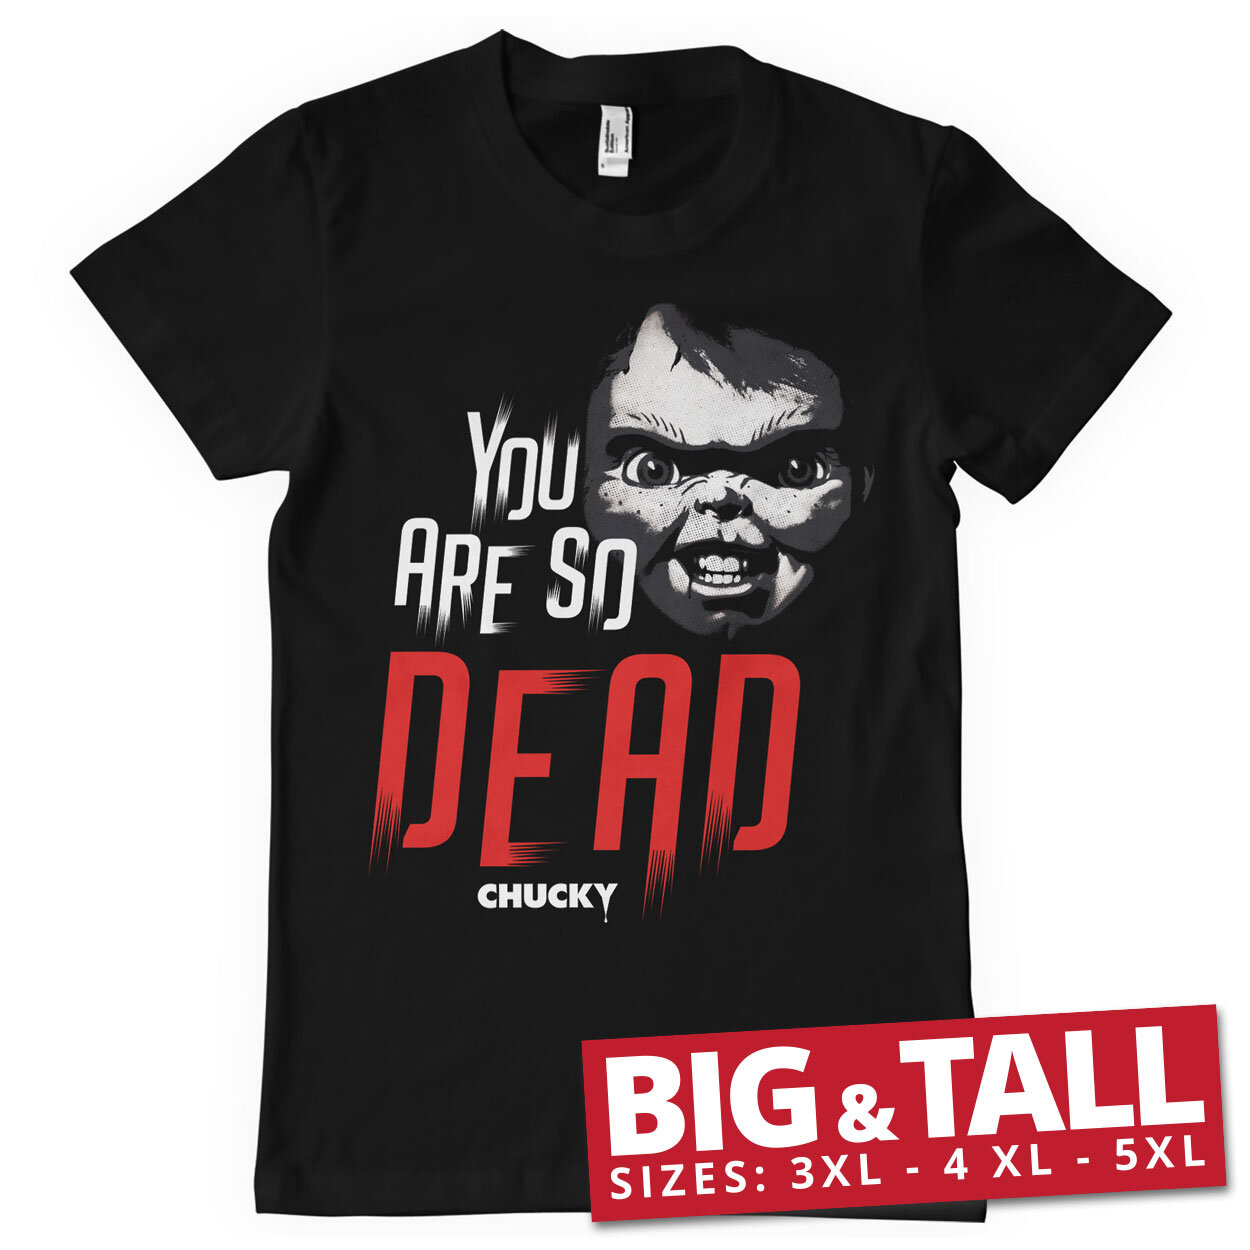 Chucky - You Are So Dead Big & Tall T-Shirt